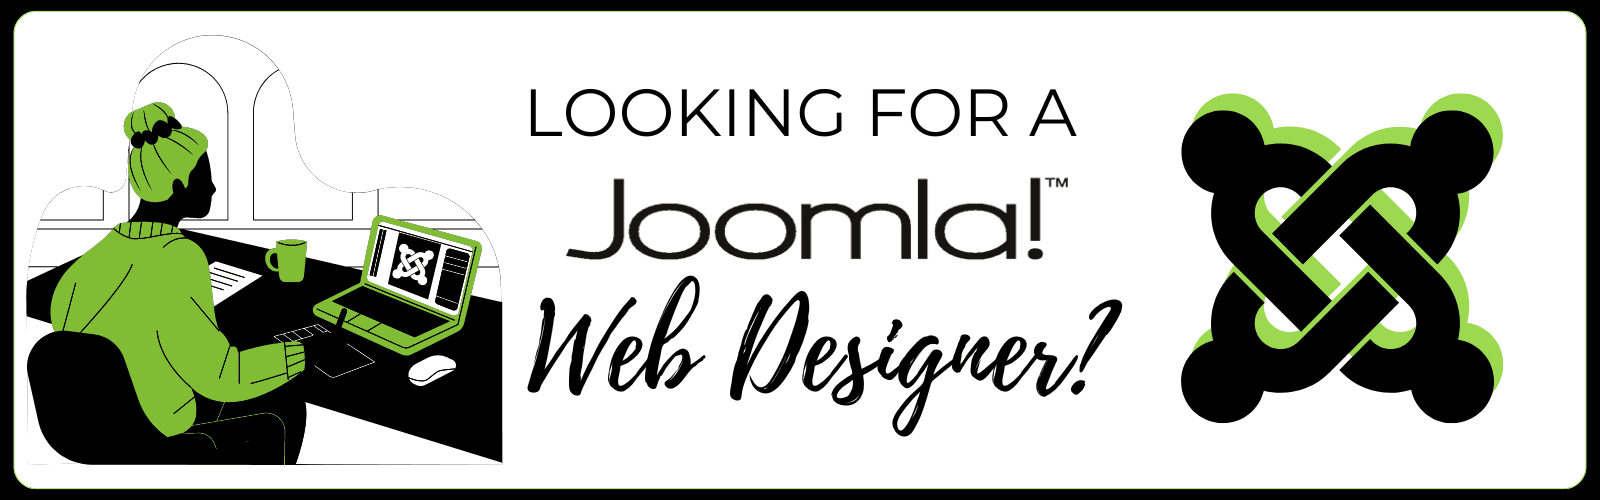 Looking for a Joomla Web Designer? Here's How to Get Started